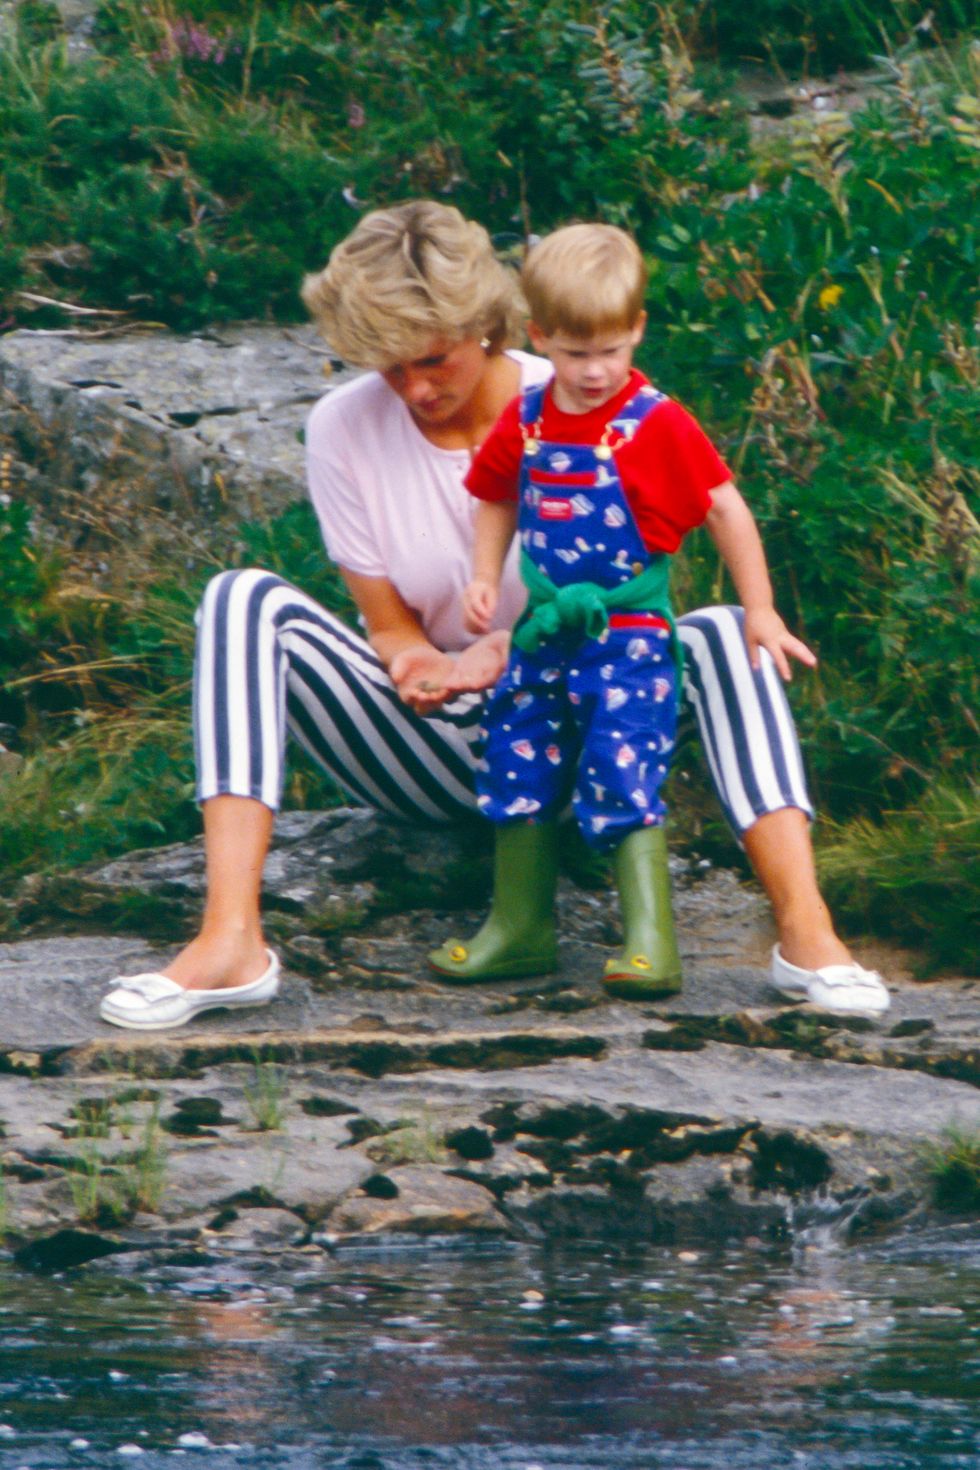 Wearing wellies before they were cool.